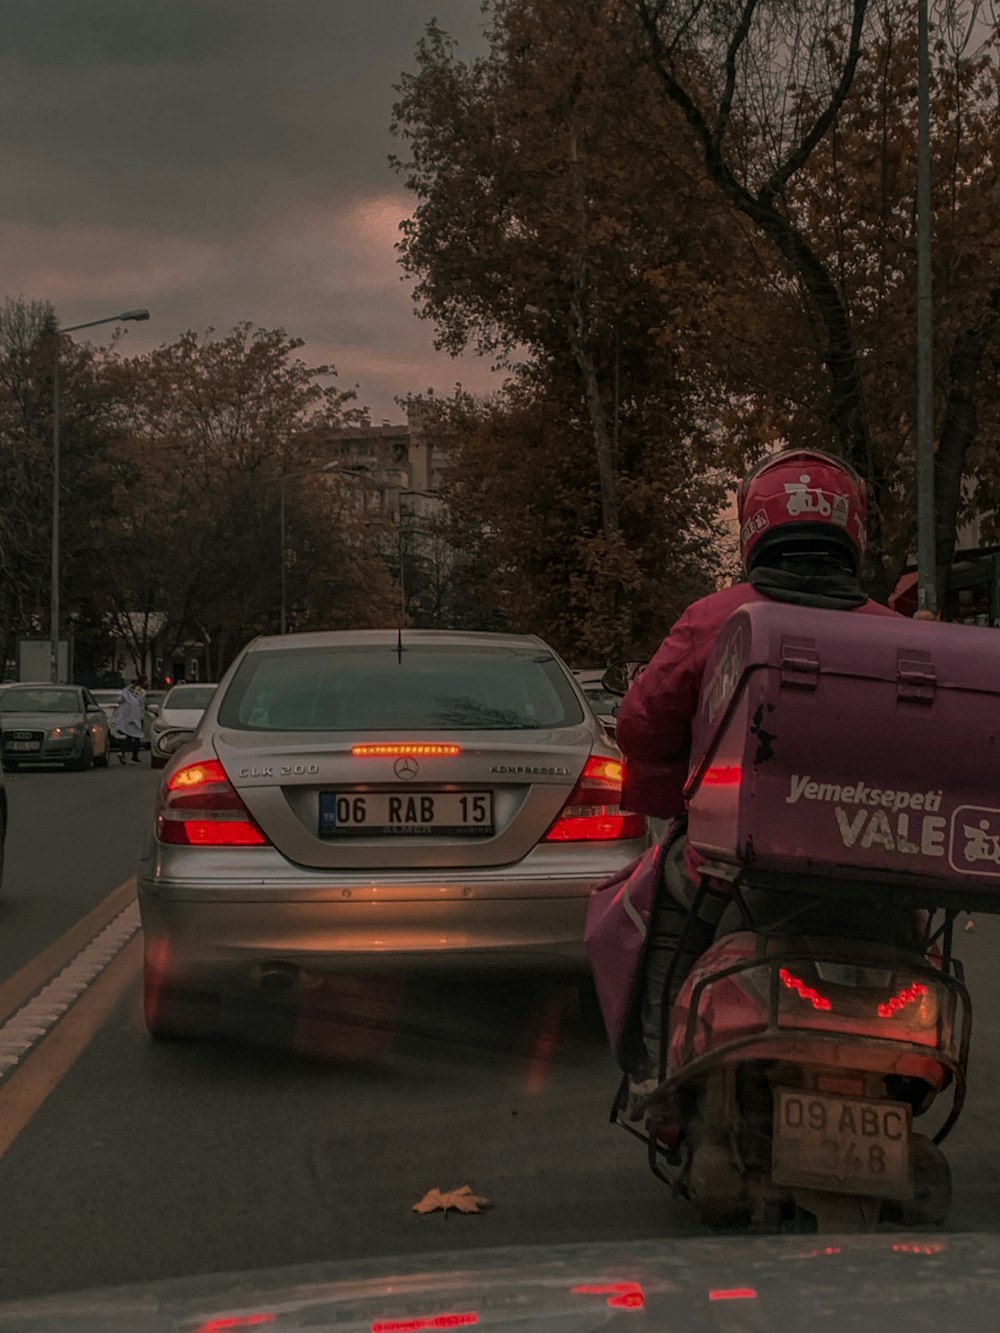 a person on a motorcycle in the street with a car behind them